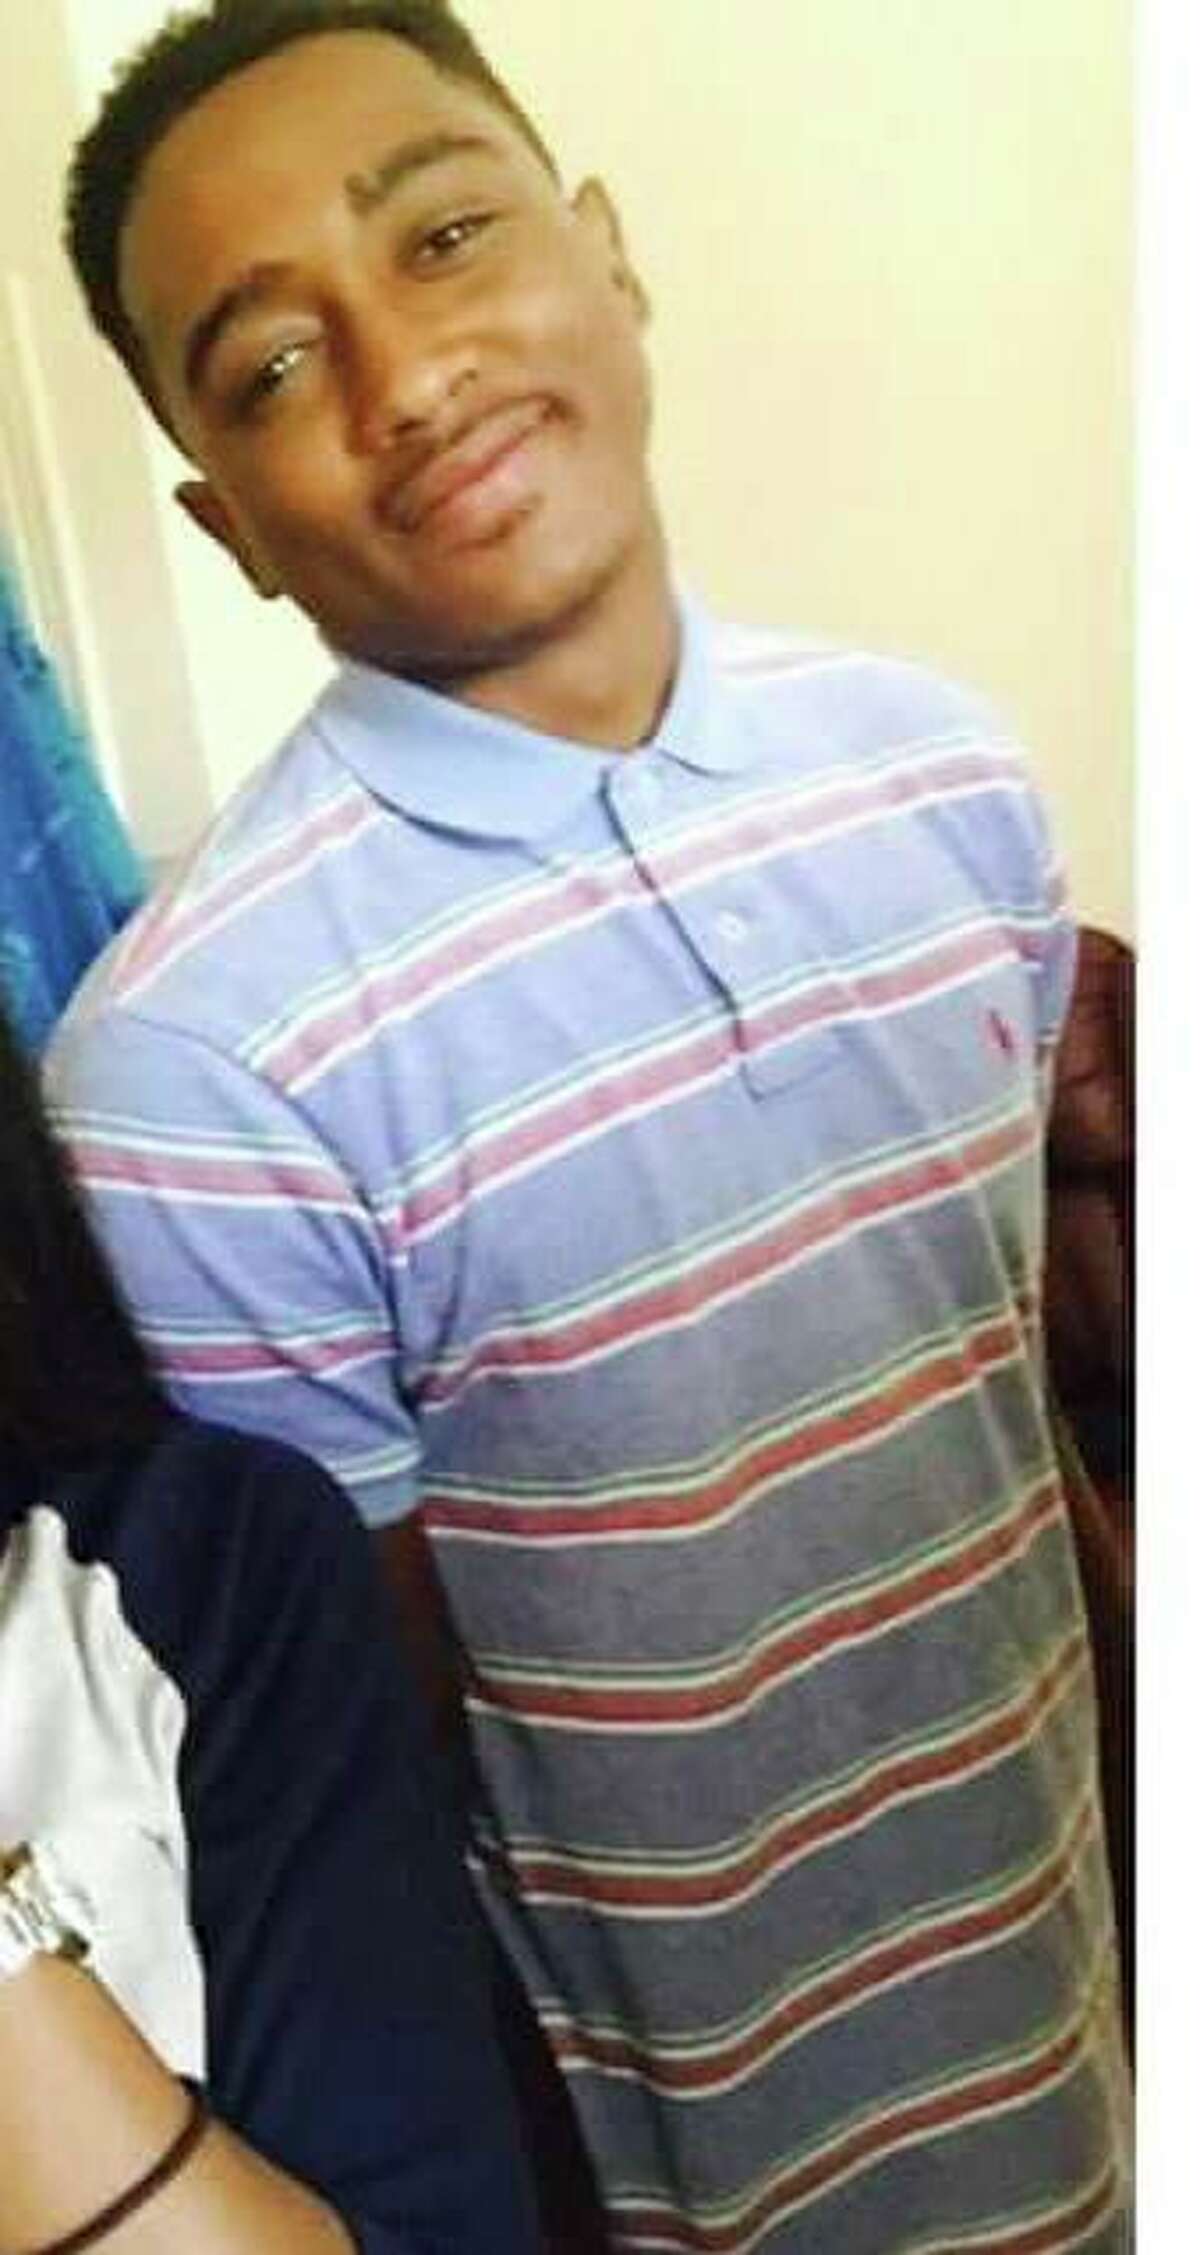 Tarik Ross is seen in an undated courtesy photo provided by his family. Ross was killed March 2, 2018.